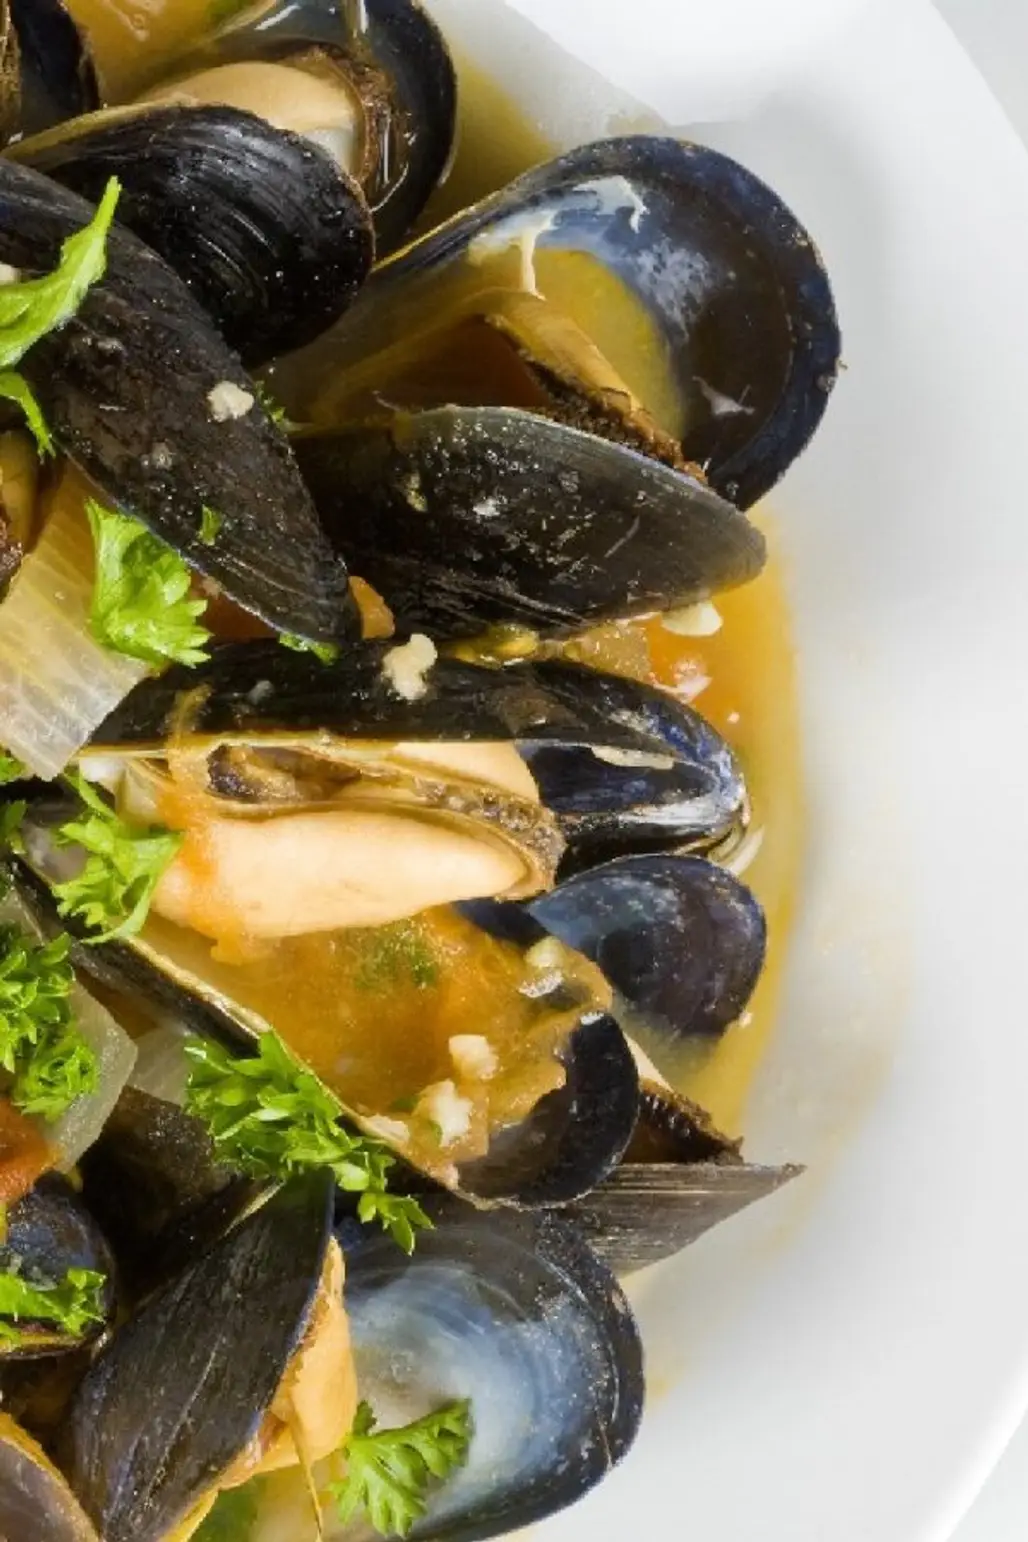 Steamed Mussels with Chorizo Sausage, Tomatoes & White Wine